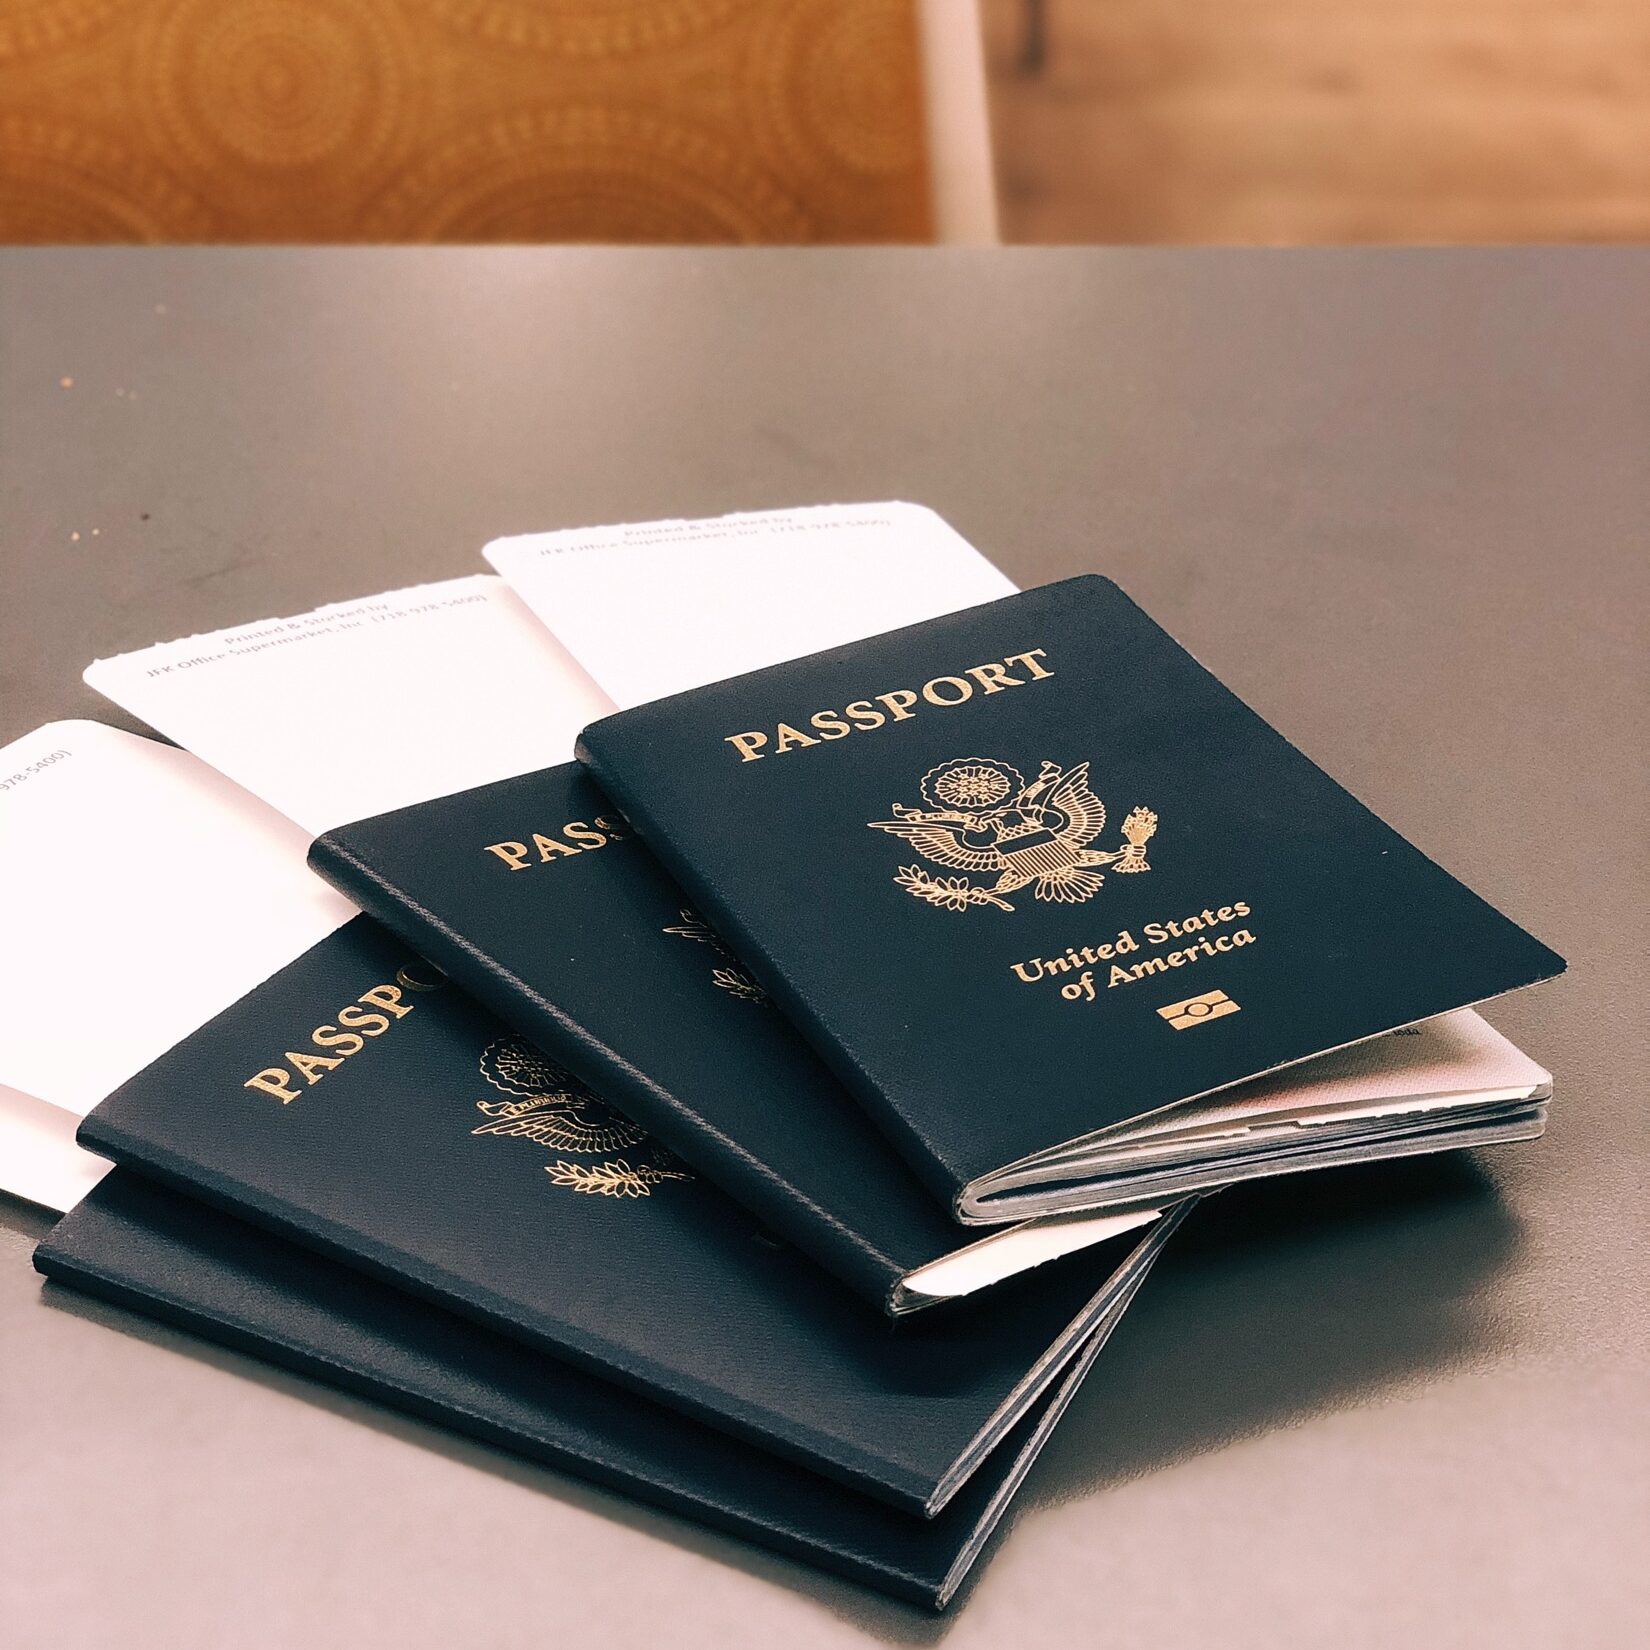 Four U.S. passports stacked on each other